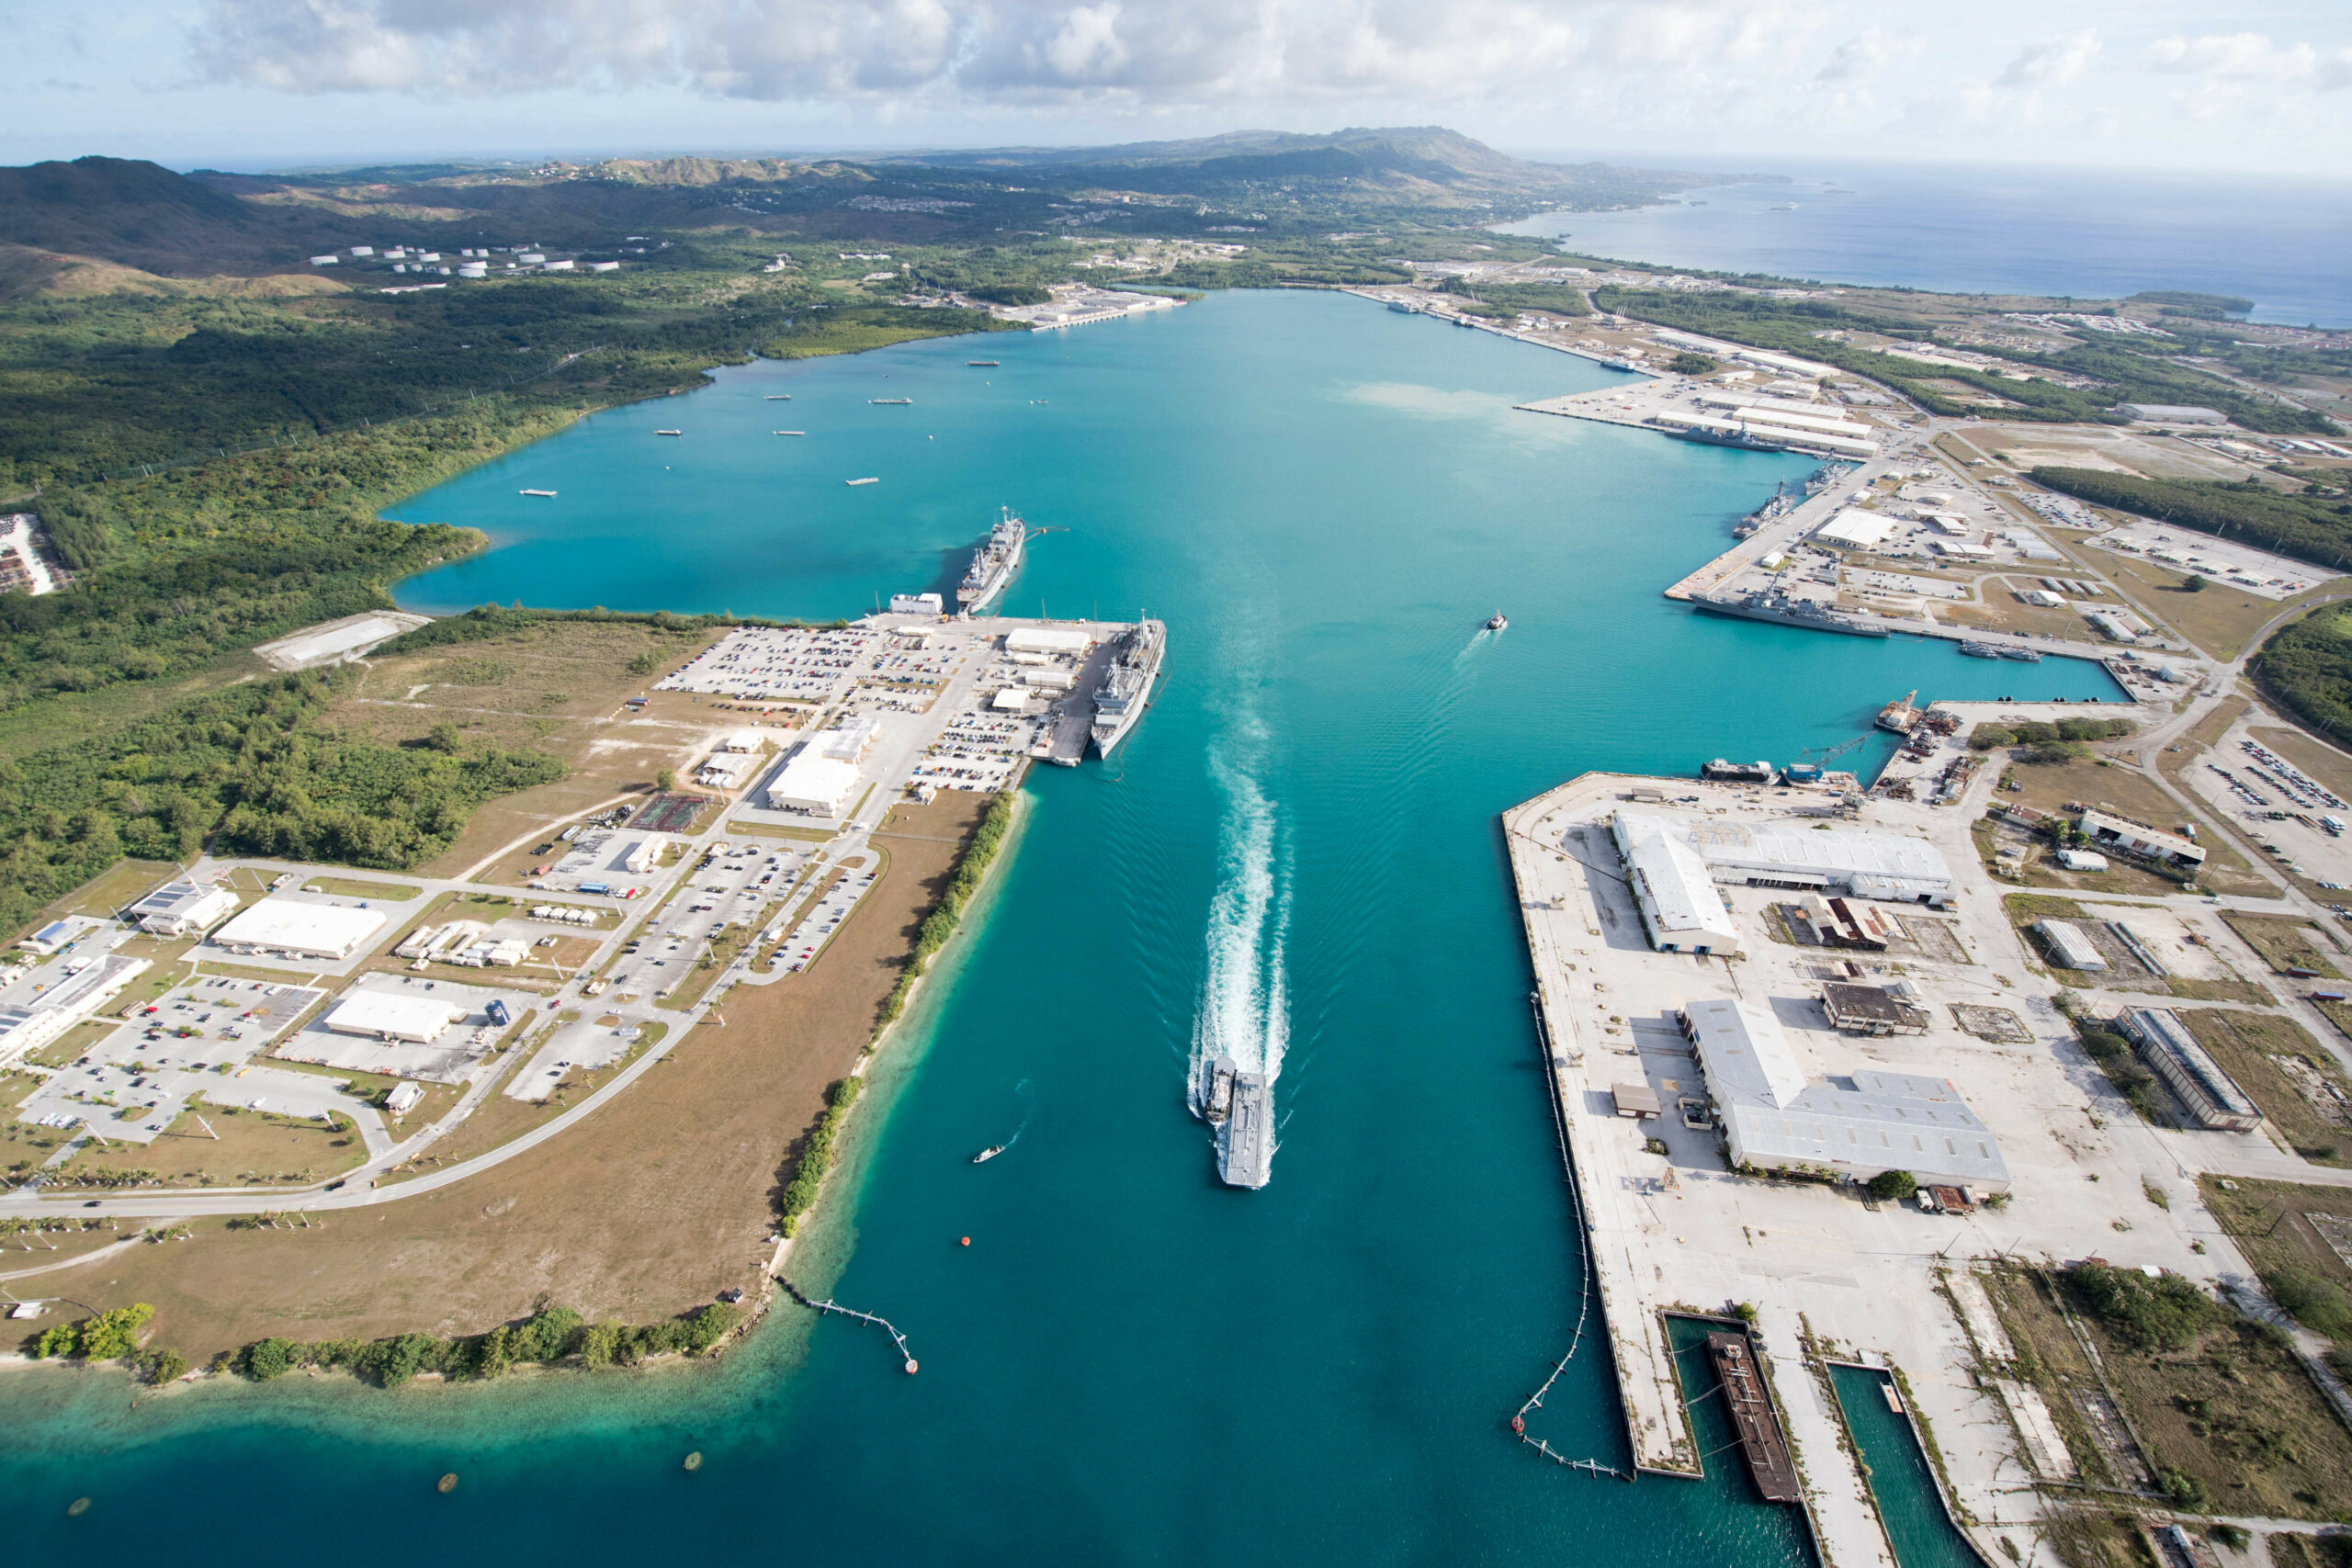 An aerial view of U.S. Naval Base Guam shows several Navy vessels moored in Apra Harbor, March 15. Some of the vessels are in Guam in support of Multi-Sail 2018 and Pacific Partnership 2018. This year also marks the 75th anniversary of the establishment of U.S. 7th Fleet. (U.S. Navy Combat Camera photo by Mass Communication Specialist 1st Class Stacy D. Laseter)